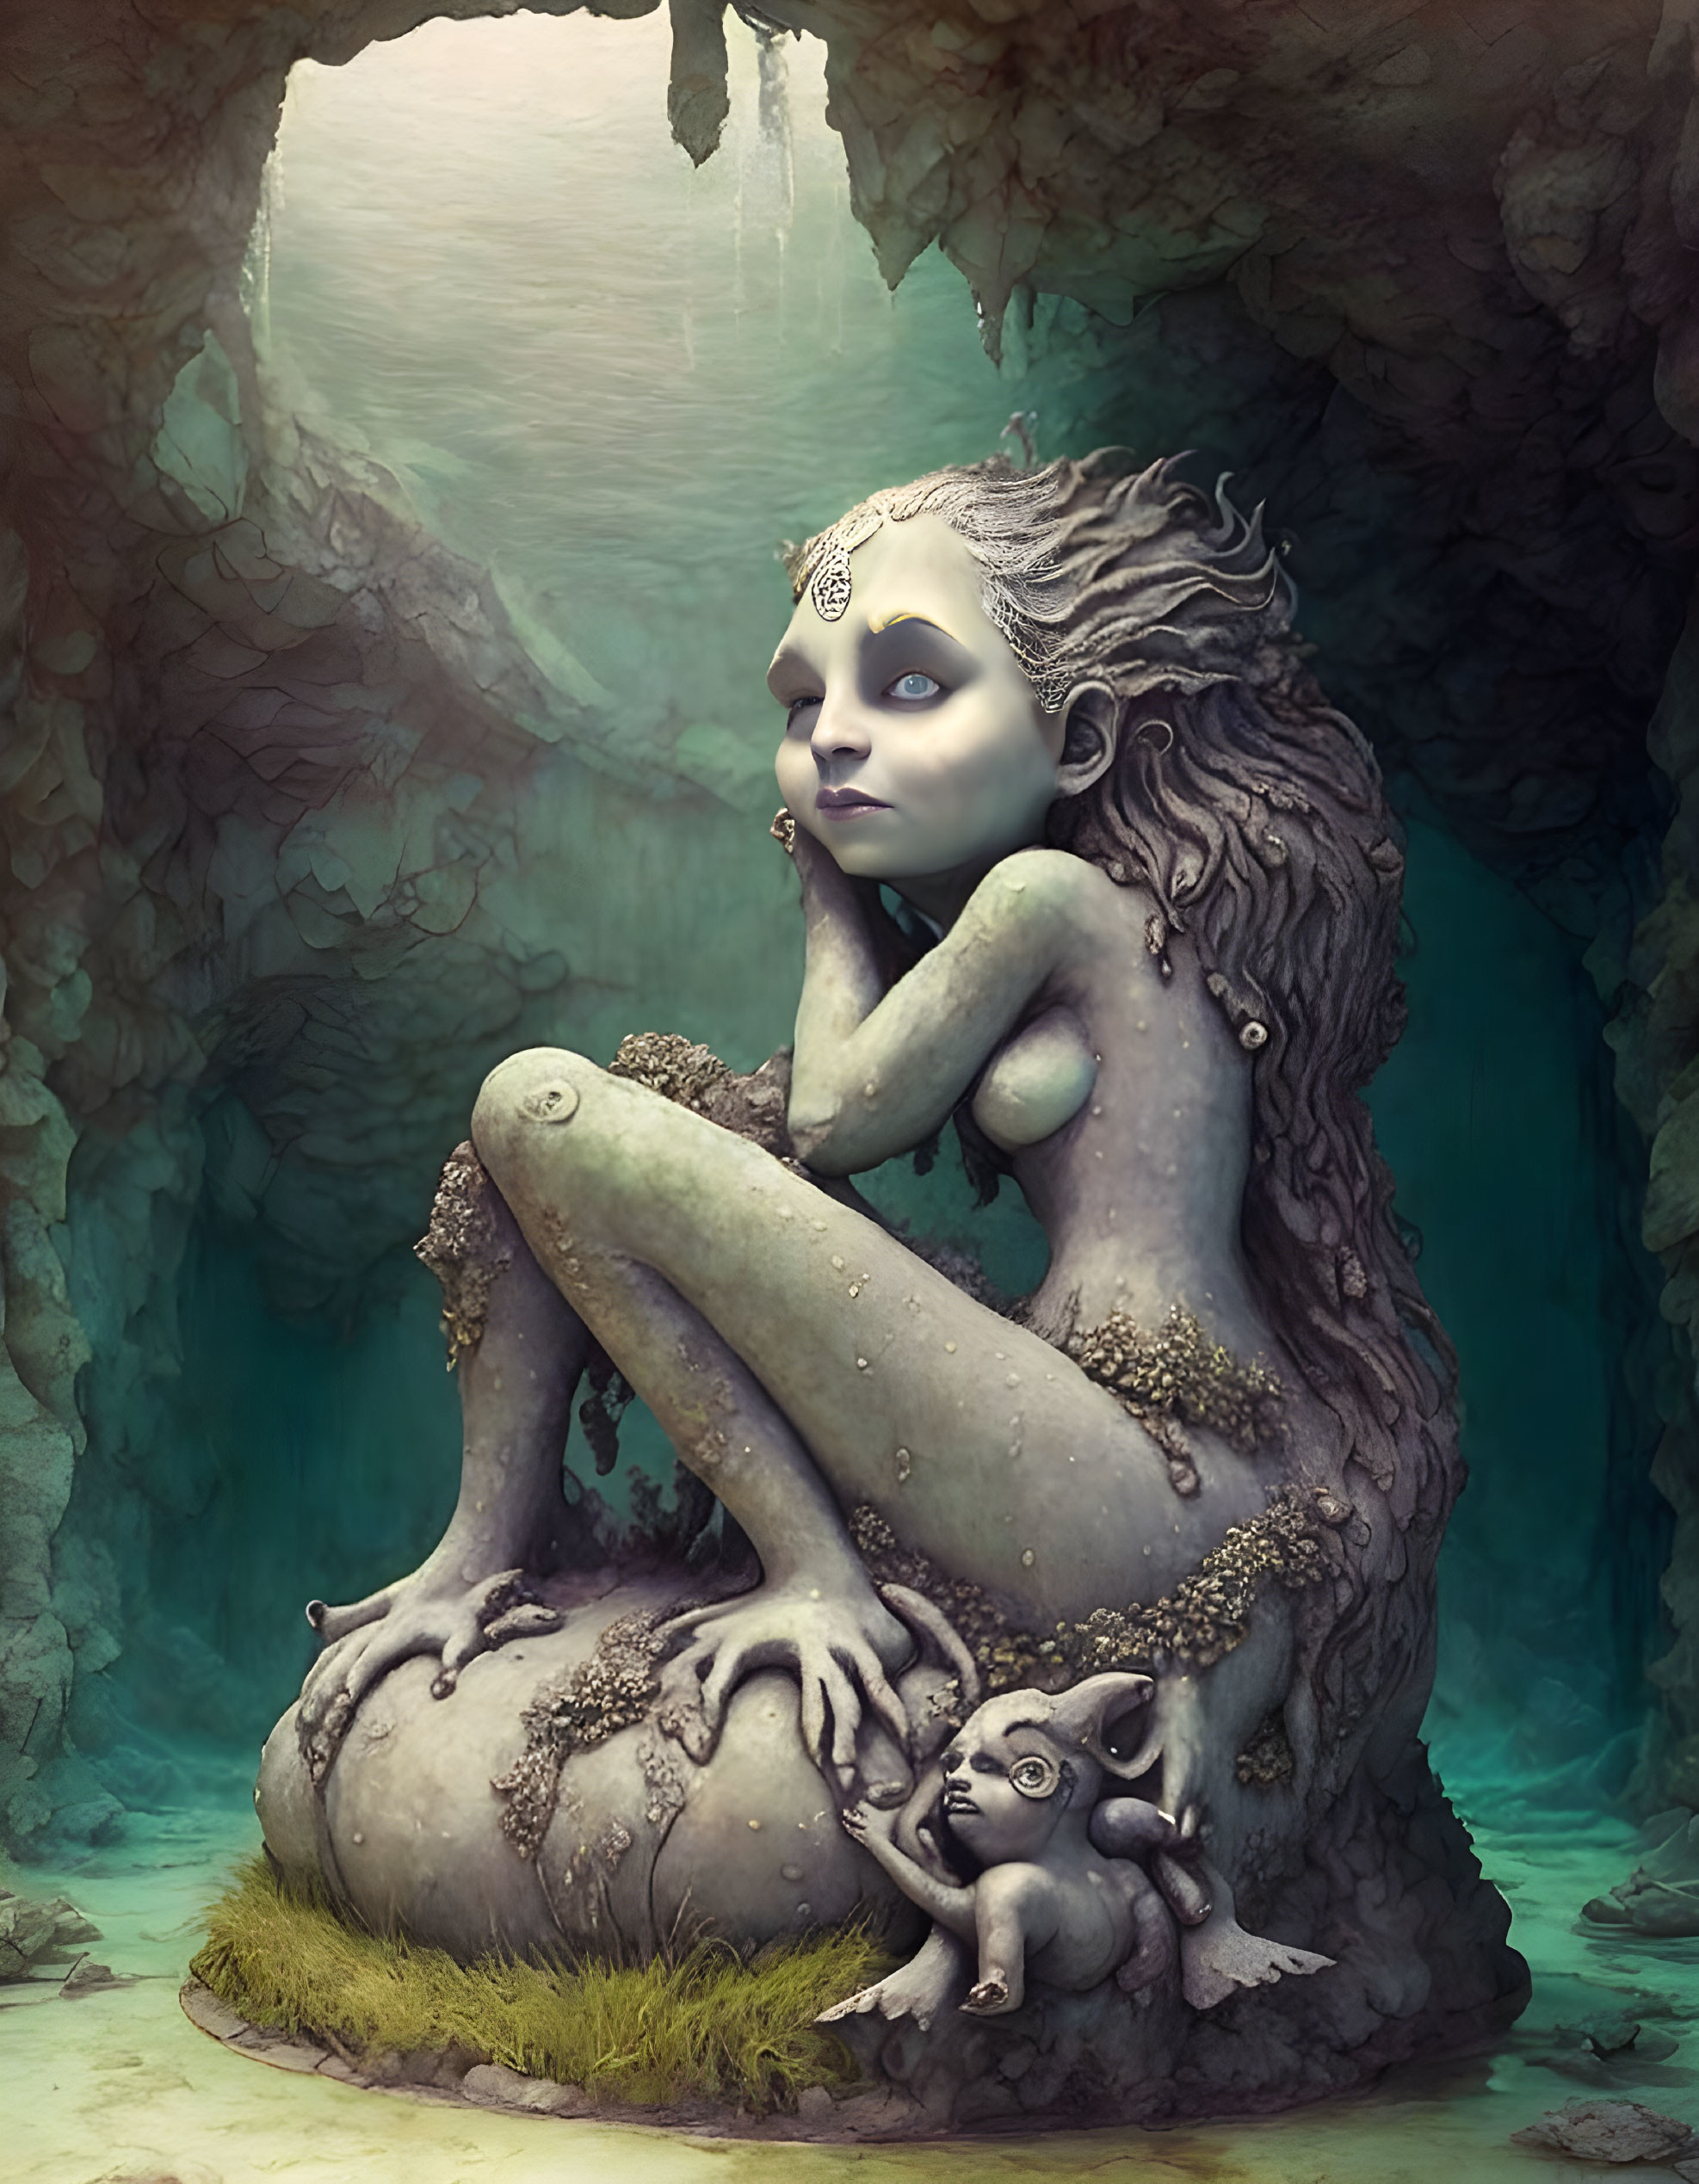 Moss-covered fantasy creature with small companion in mystical cave